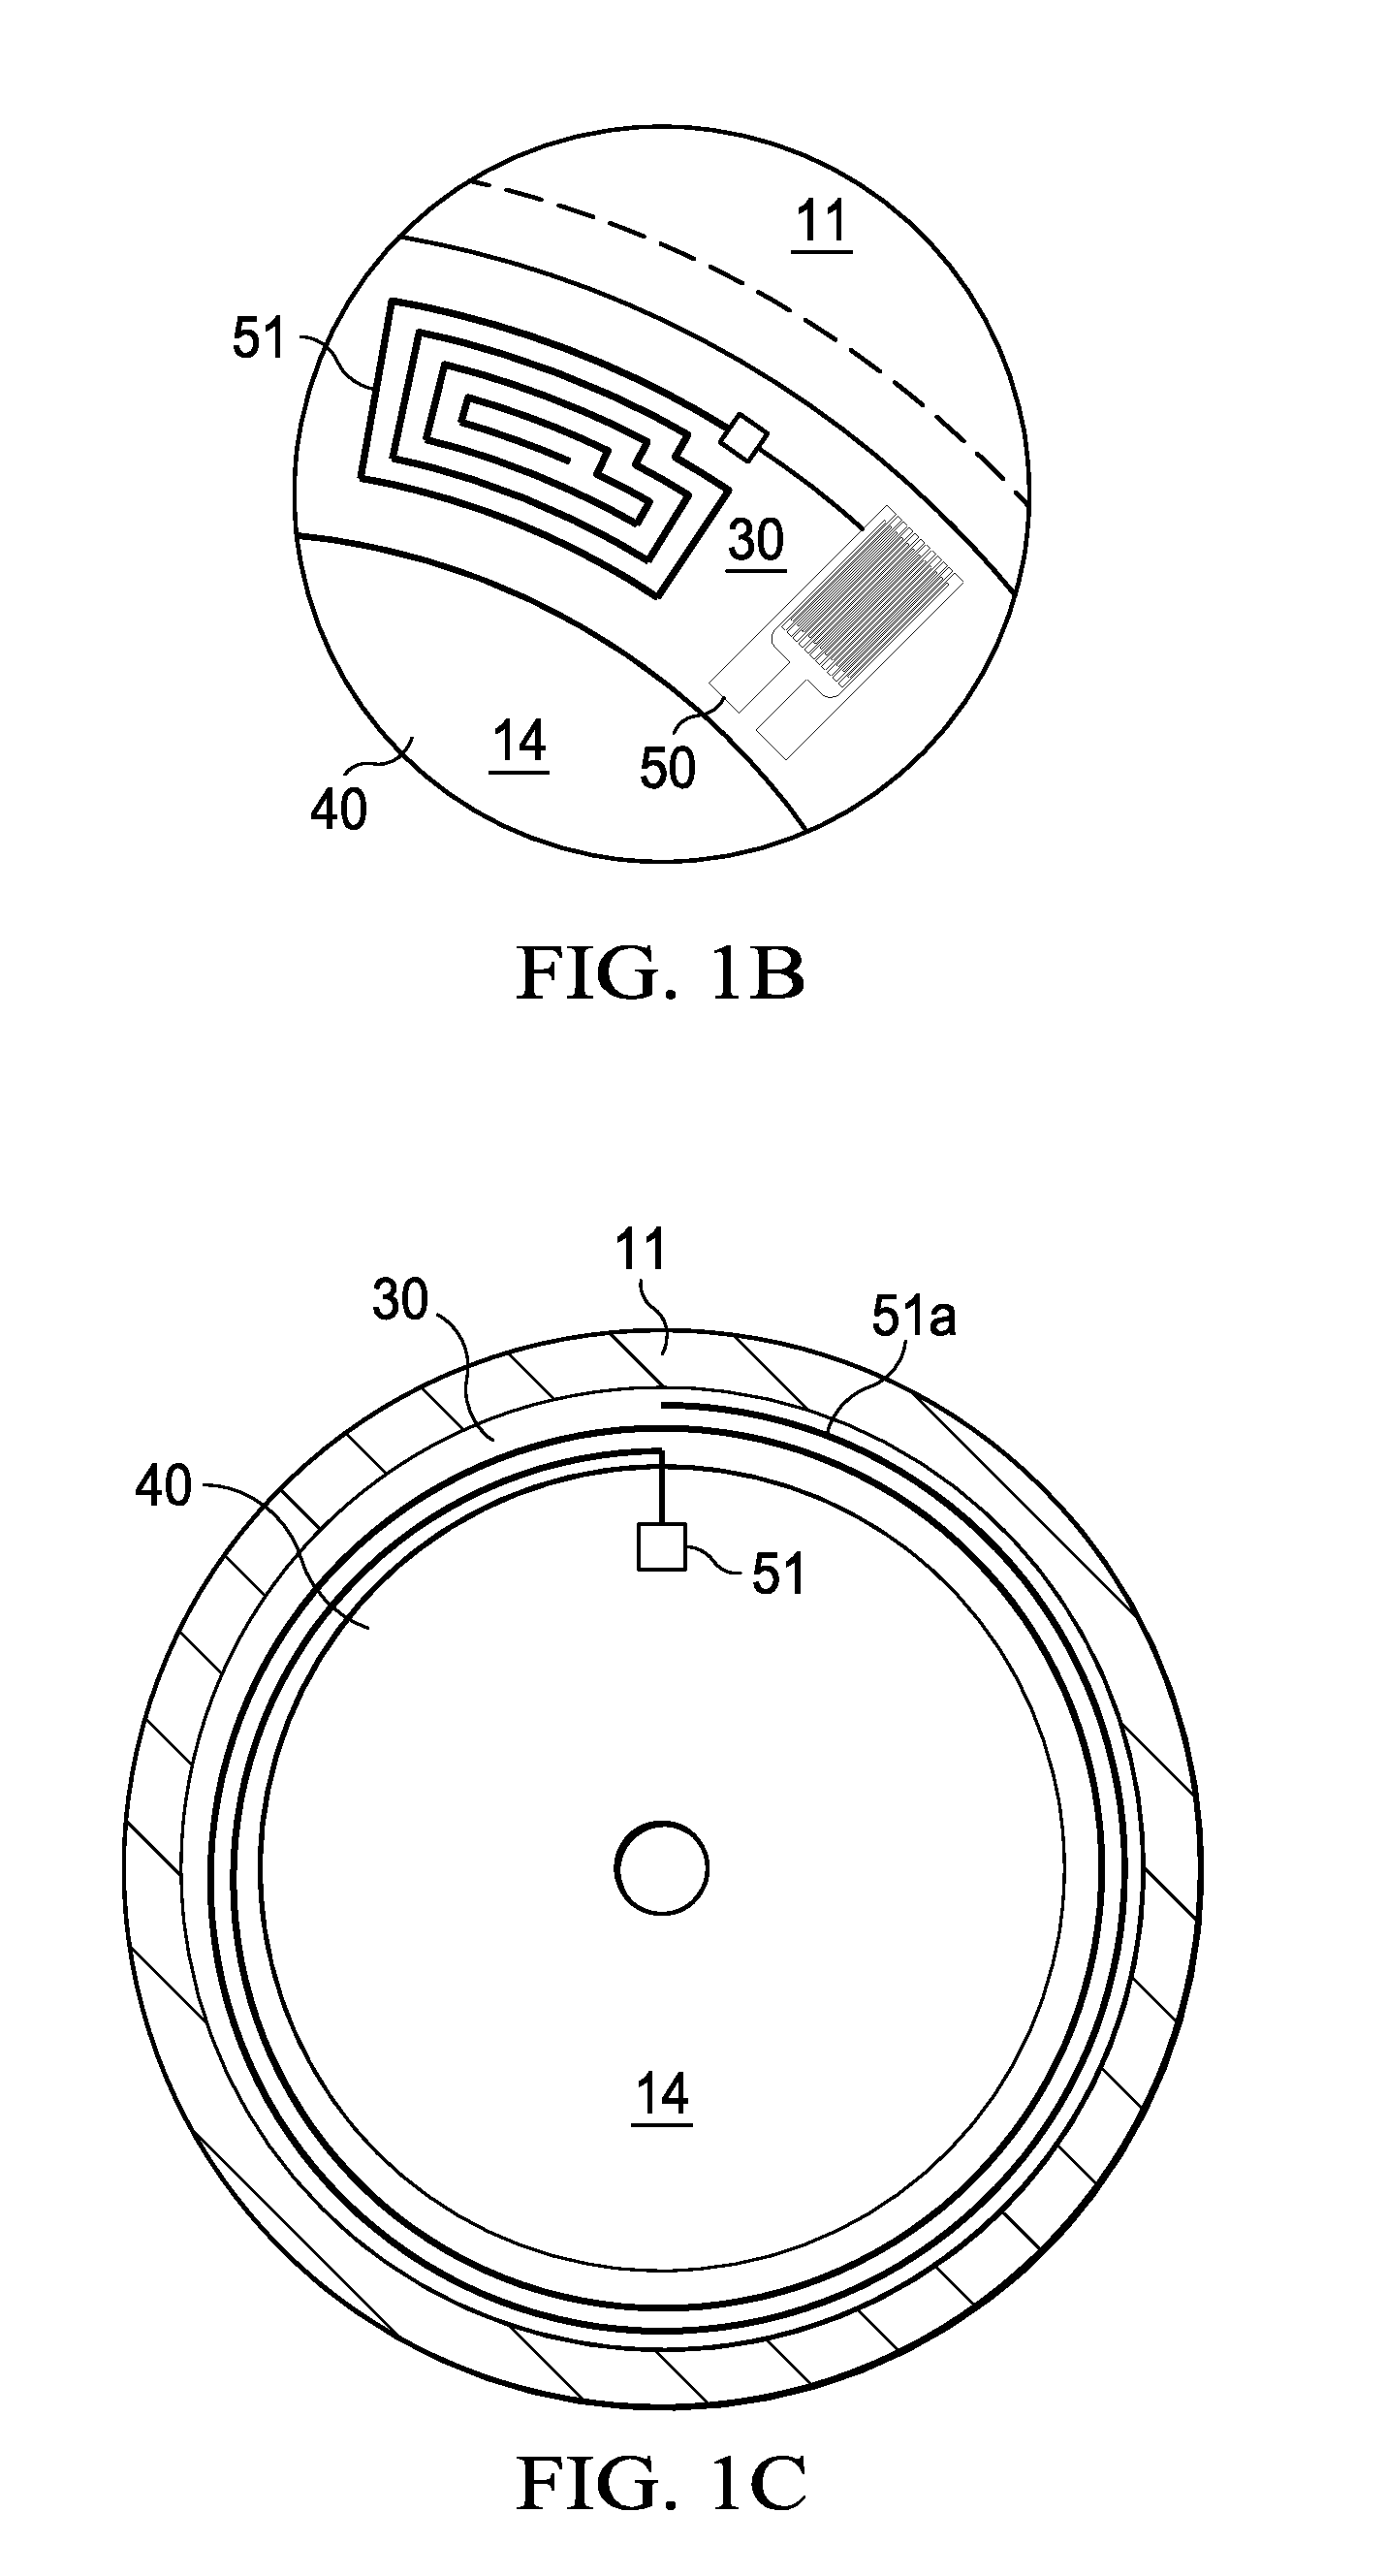 Systems and methods for monitoring a disc pump system using RFID